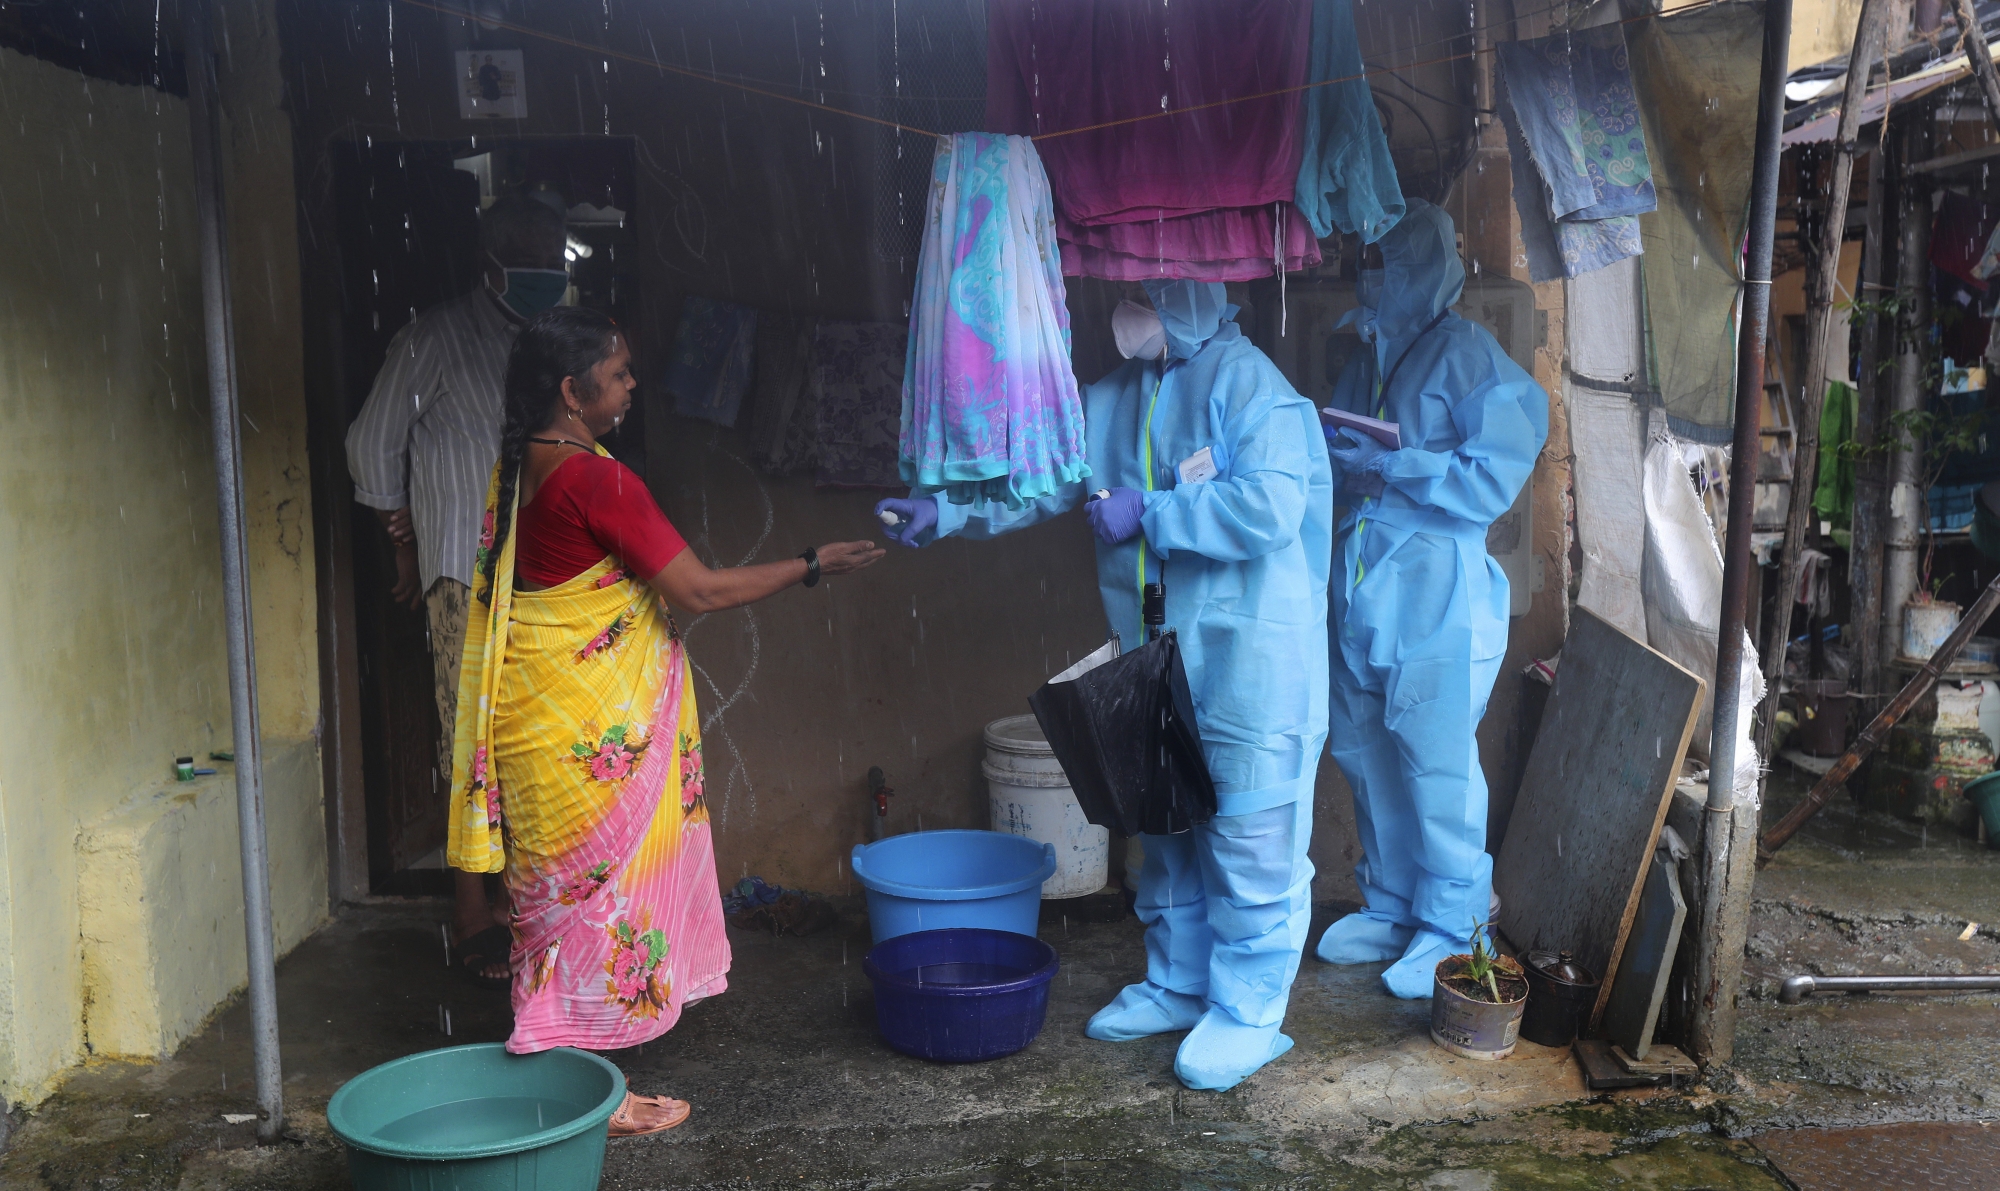 Health workers screen people for COVID-19 symptoms at a slum in Mumbai, India, Tuesday, July 14, 2020. Several Indian states imposed weekend curfews and locked down high-risk areas as the number of coronavirus cases surged past 900,000 on Tuesday. (AP Photo/Rafiq Maqbool) ArcInfo